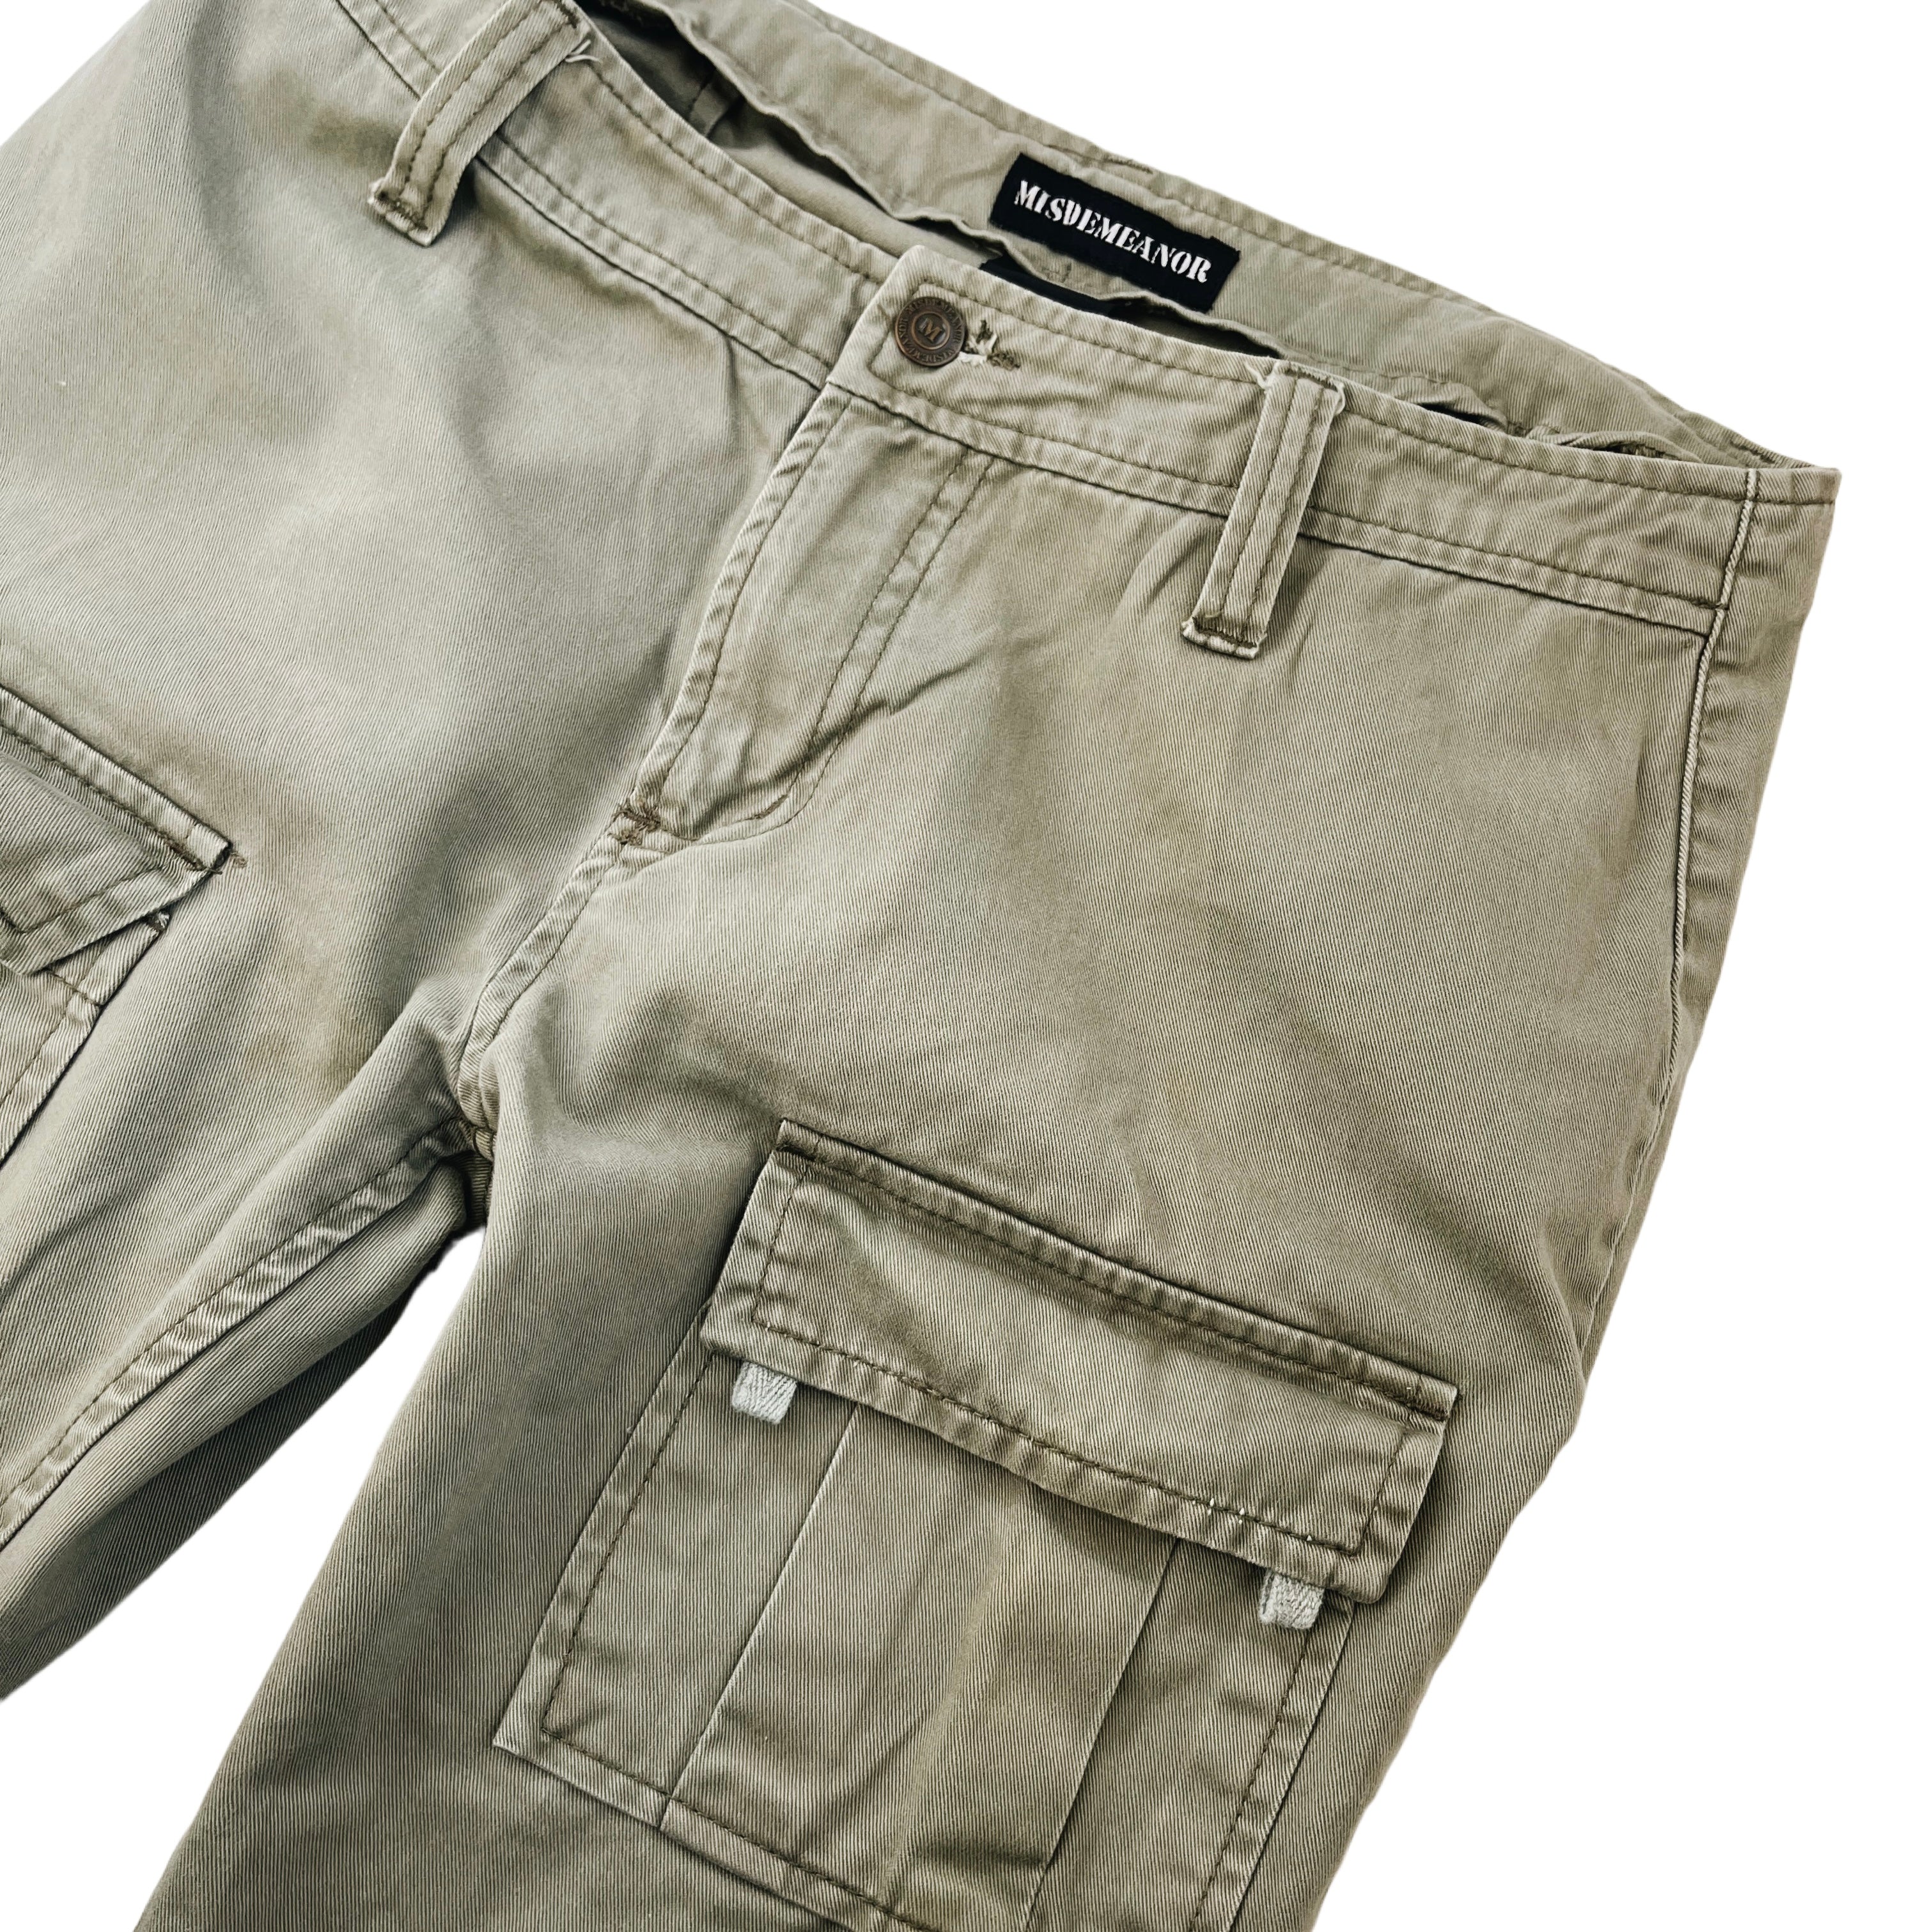 Army Green Cargo Flare Pants (L)